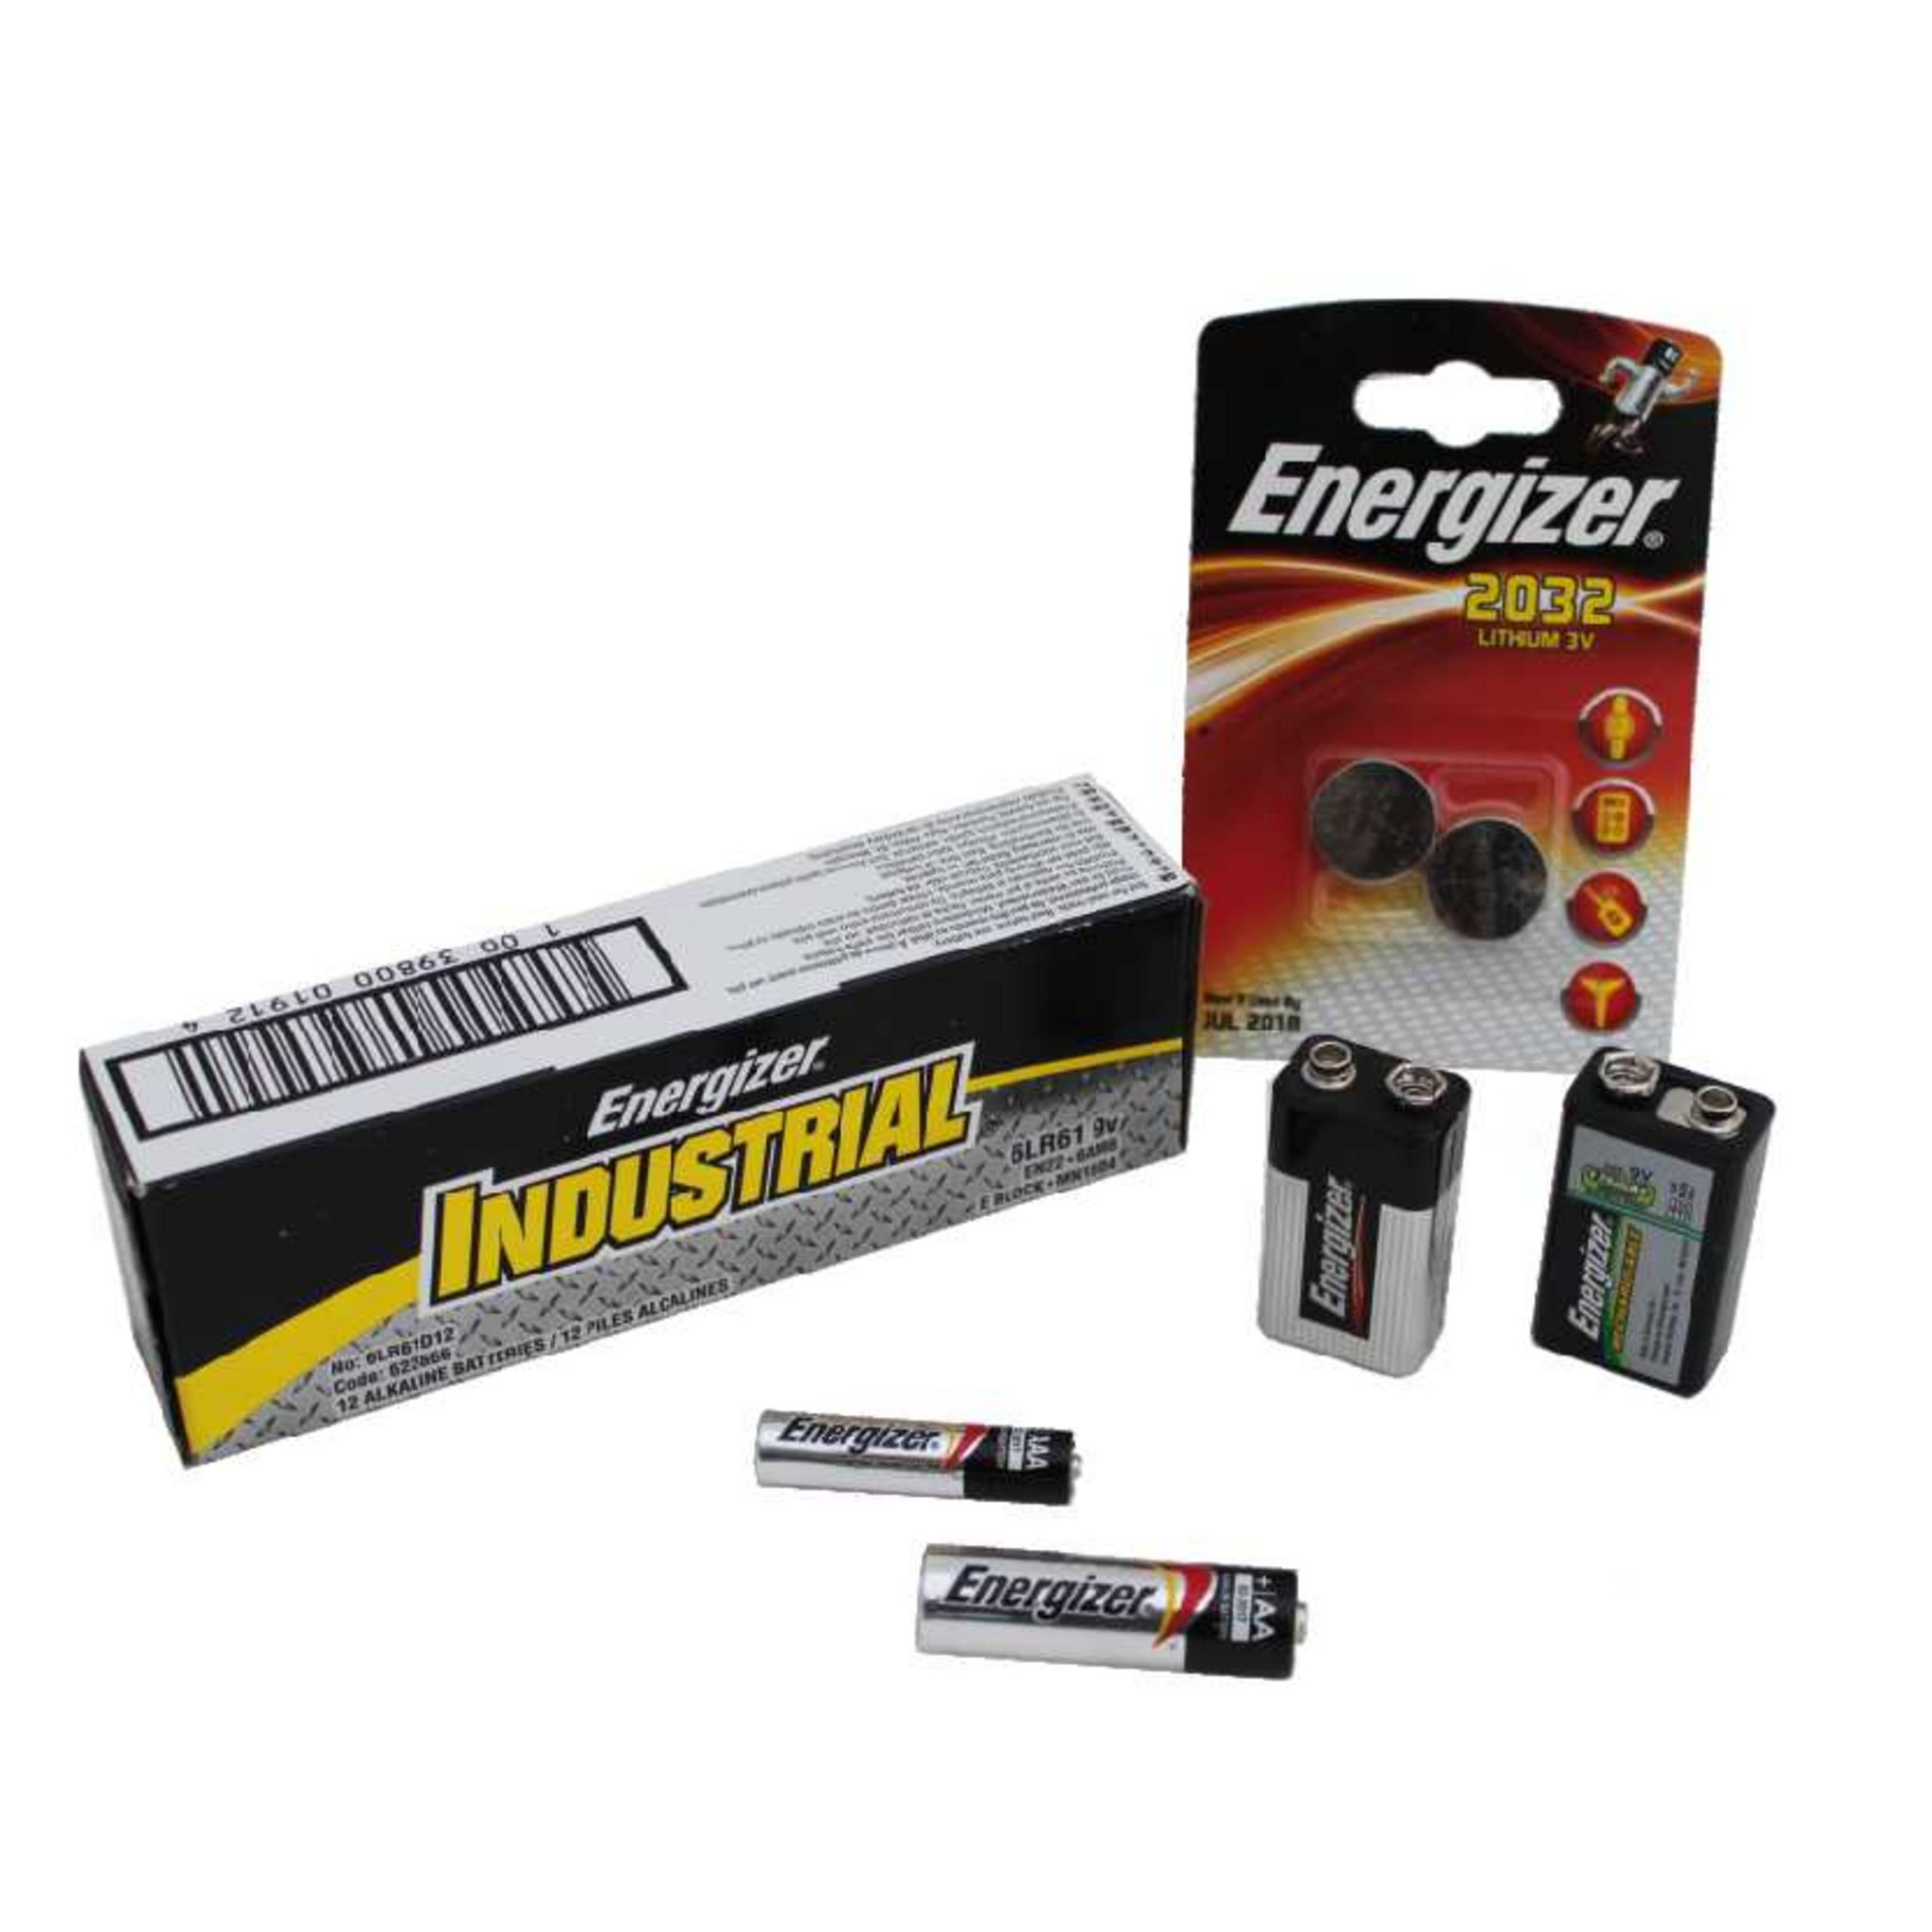 ENERGIZER CR2032 - 4 piles boutons - 3V Pas Cher